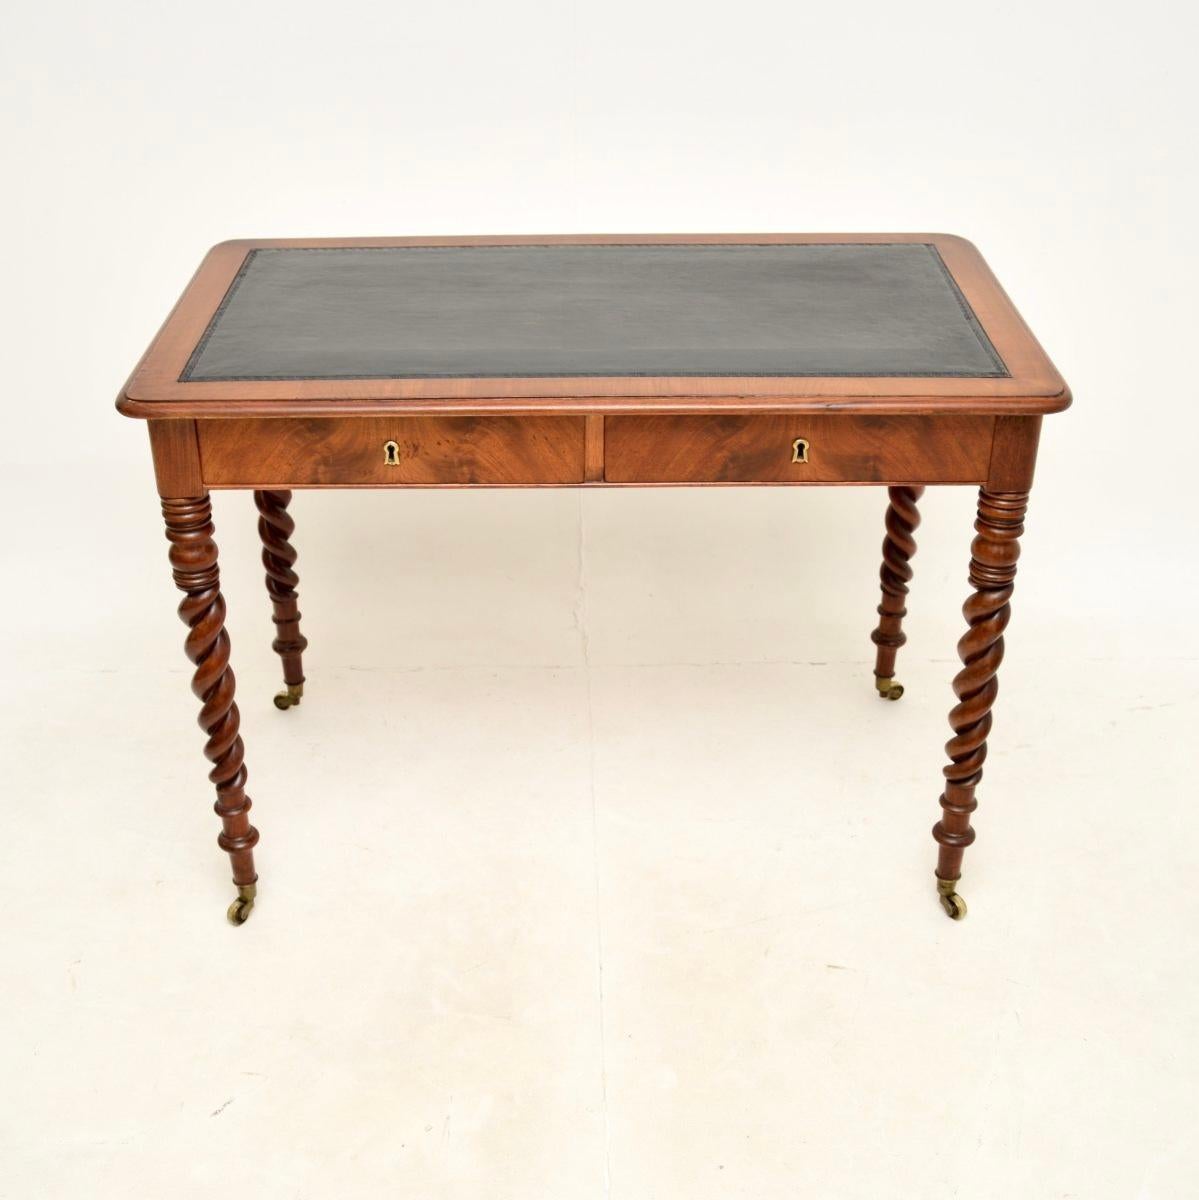 A superb antique Victorian barley twist writing table / desk. This was made in Sweden, it dates from around the 1850-1860 period.

It is of extremely high quality, sitting on beautifully turned barley twist legs and brass casters. The drawers have